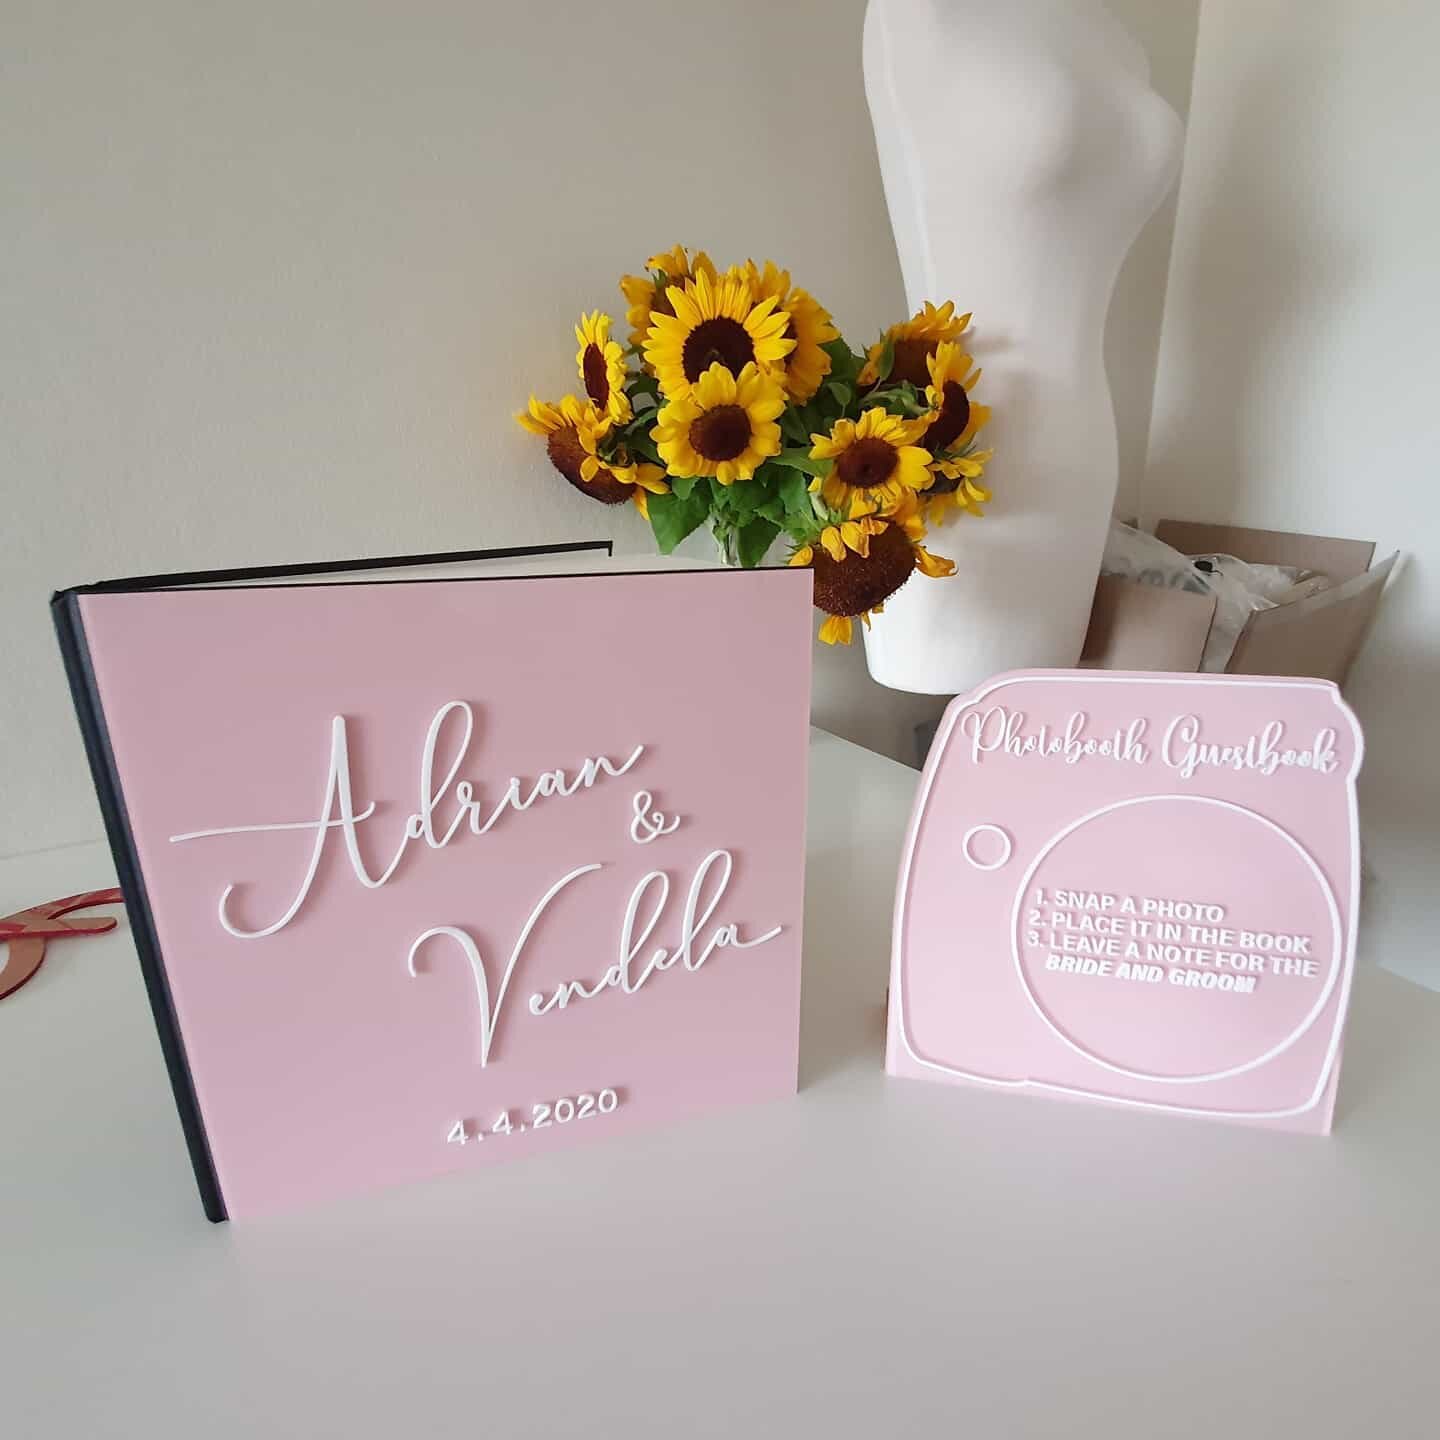 Here's a great way to personalise your photo book and photo area at any wedding. 
This sign and cover have both been back sprayed and had white acrylic lettering laminated to the front side to give a high gloss acrylic look all round.